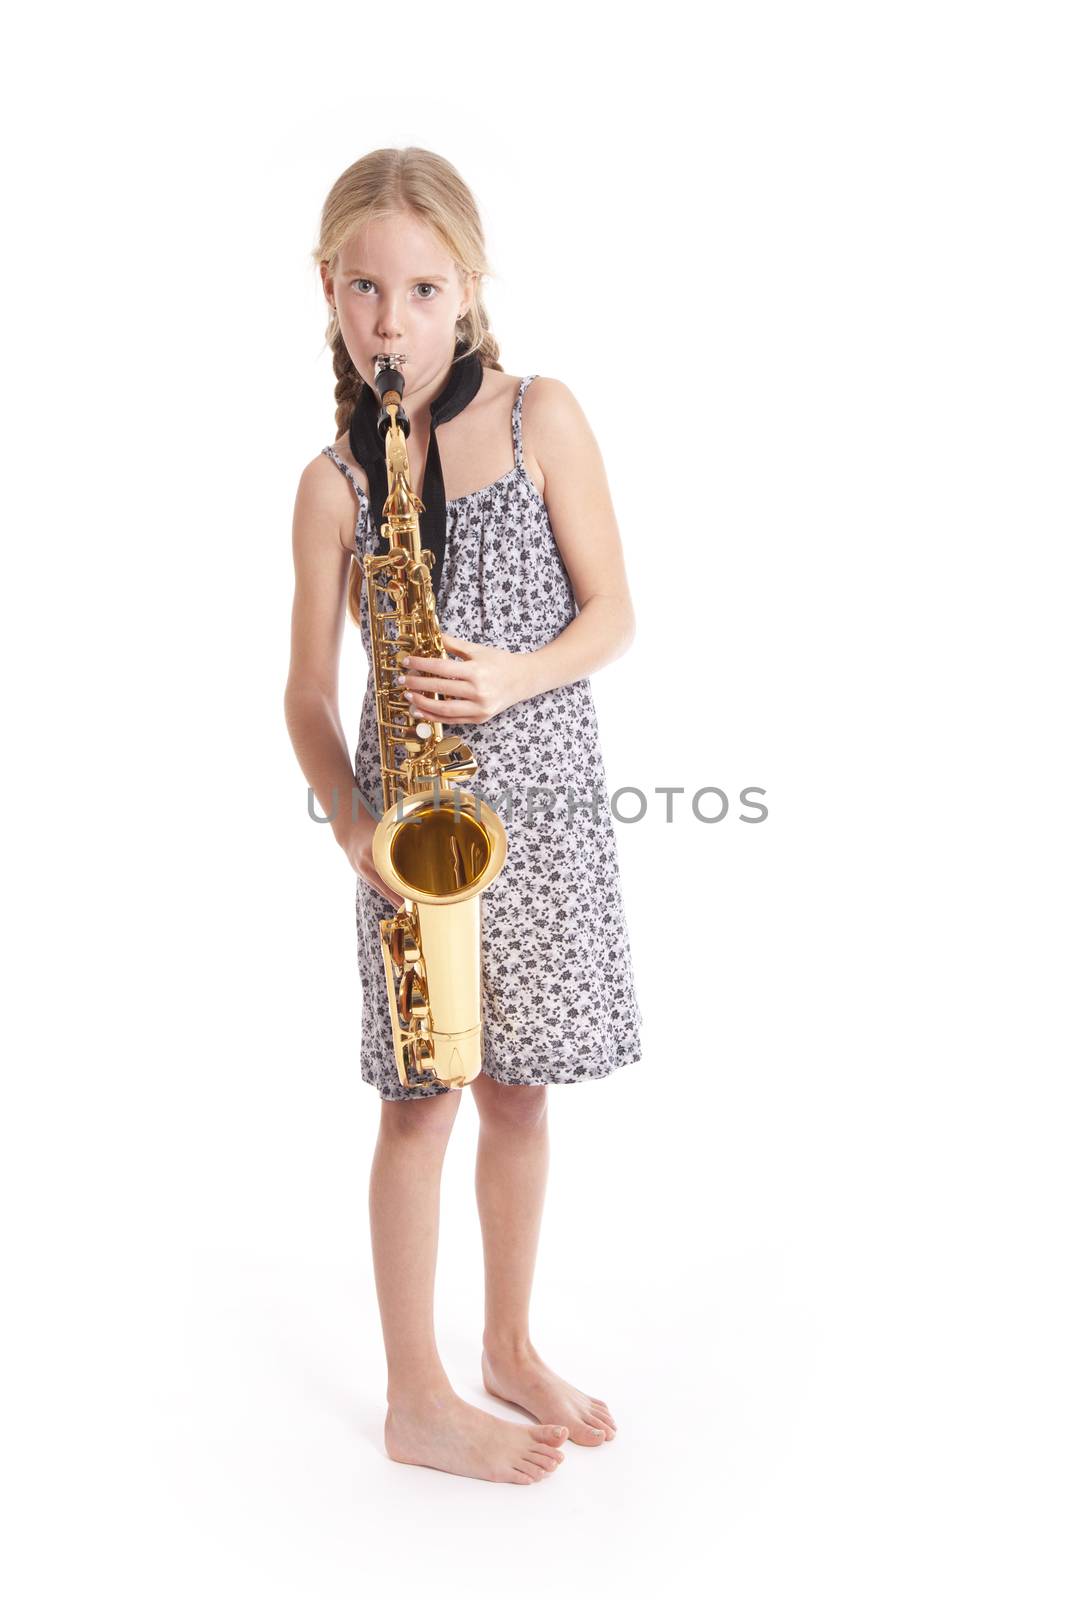 young girl in dress and her saxophone standing in studio against white background